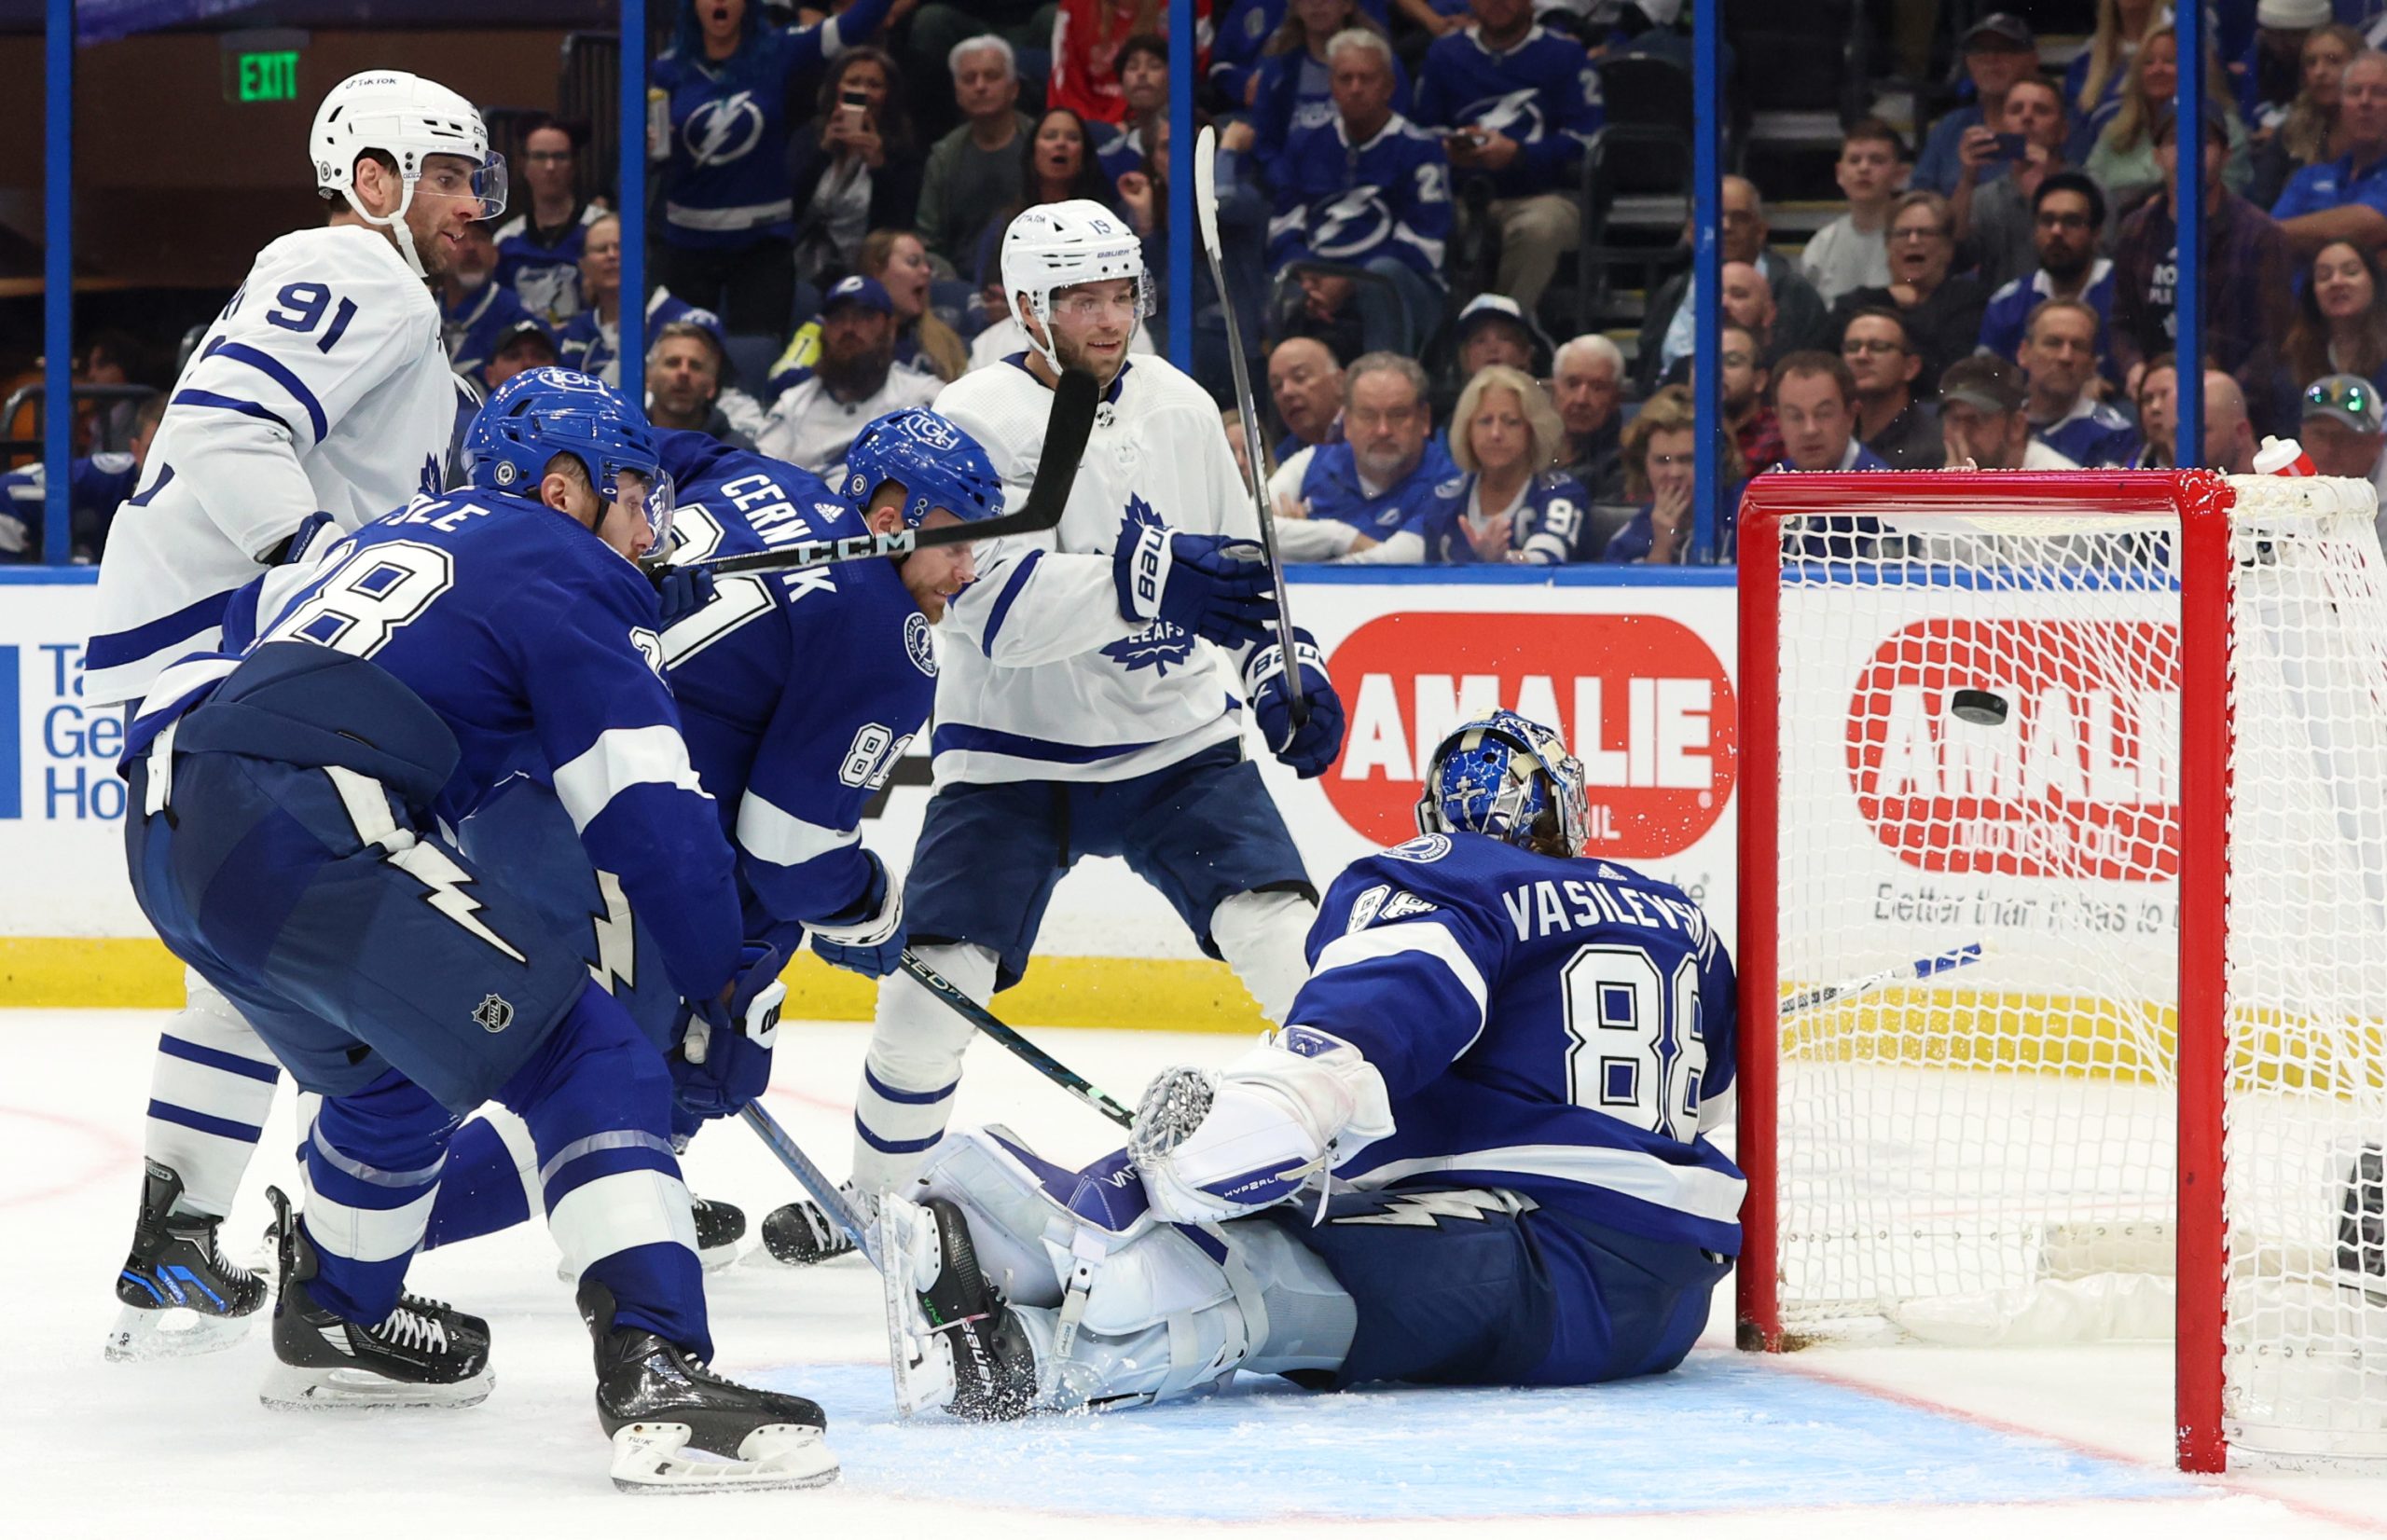 Tampa Bay Lightning vs Toronto Maple Leafs sees a puck near the net